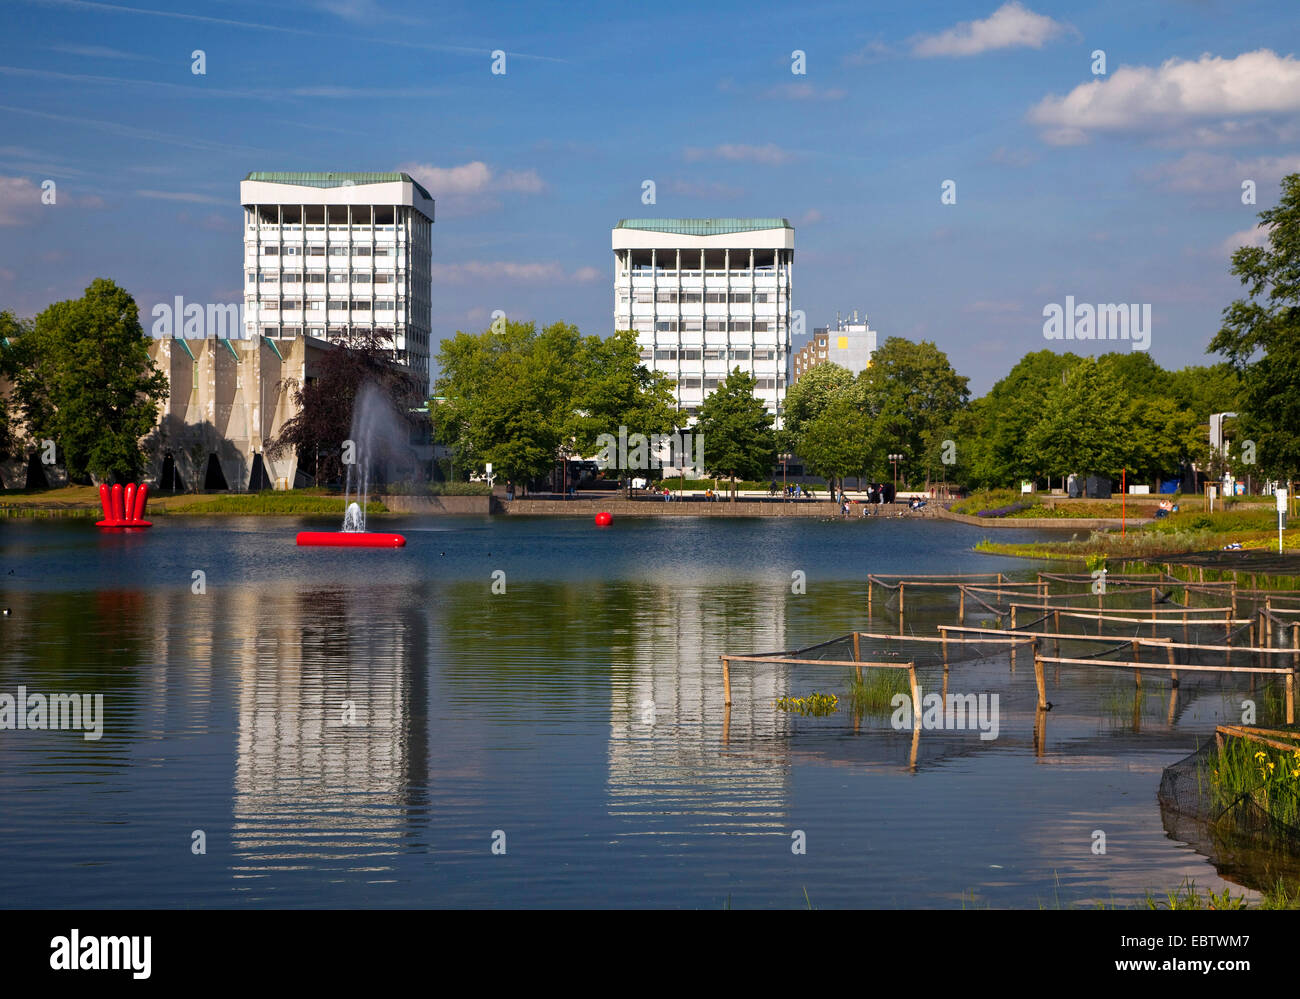 two young people sitting on a bench at the city lake with the two town hall towers in the background reflecting in the water, Germany, North Rhine-Westphalia, Ruhr Area, Marl Stock Photo